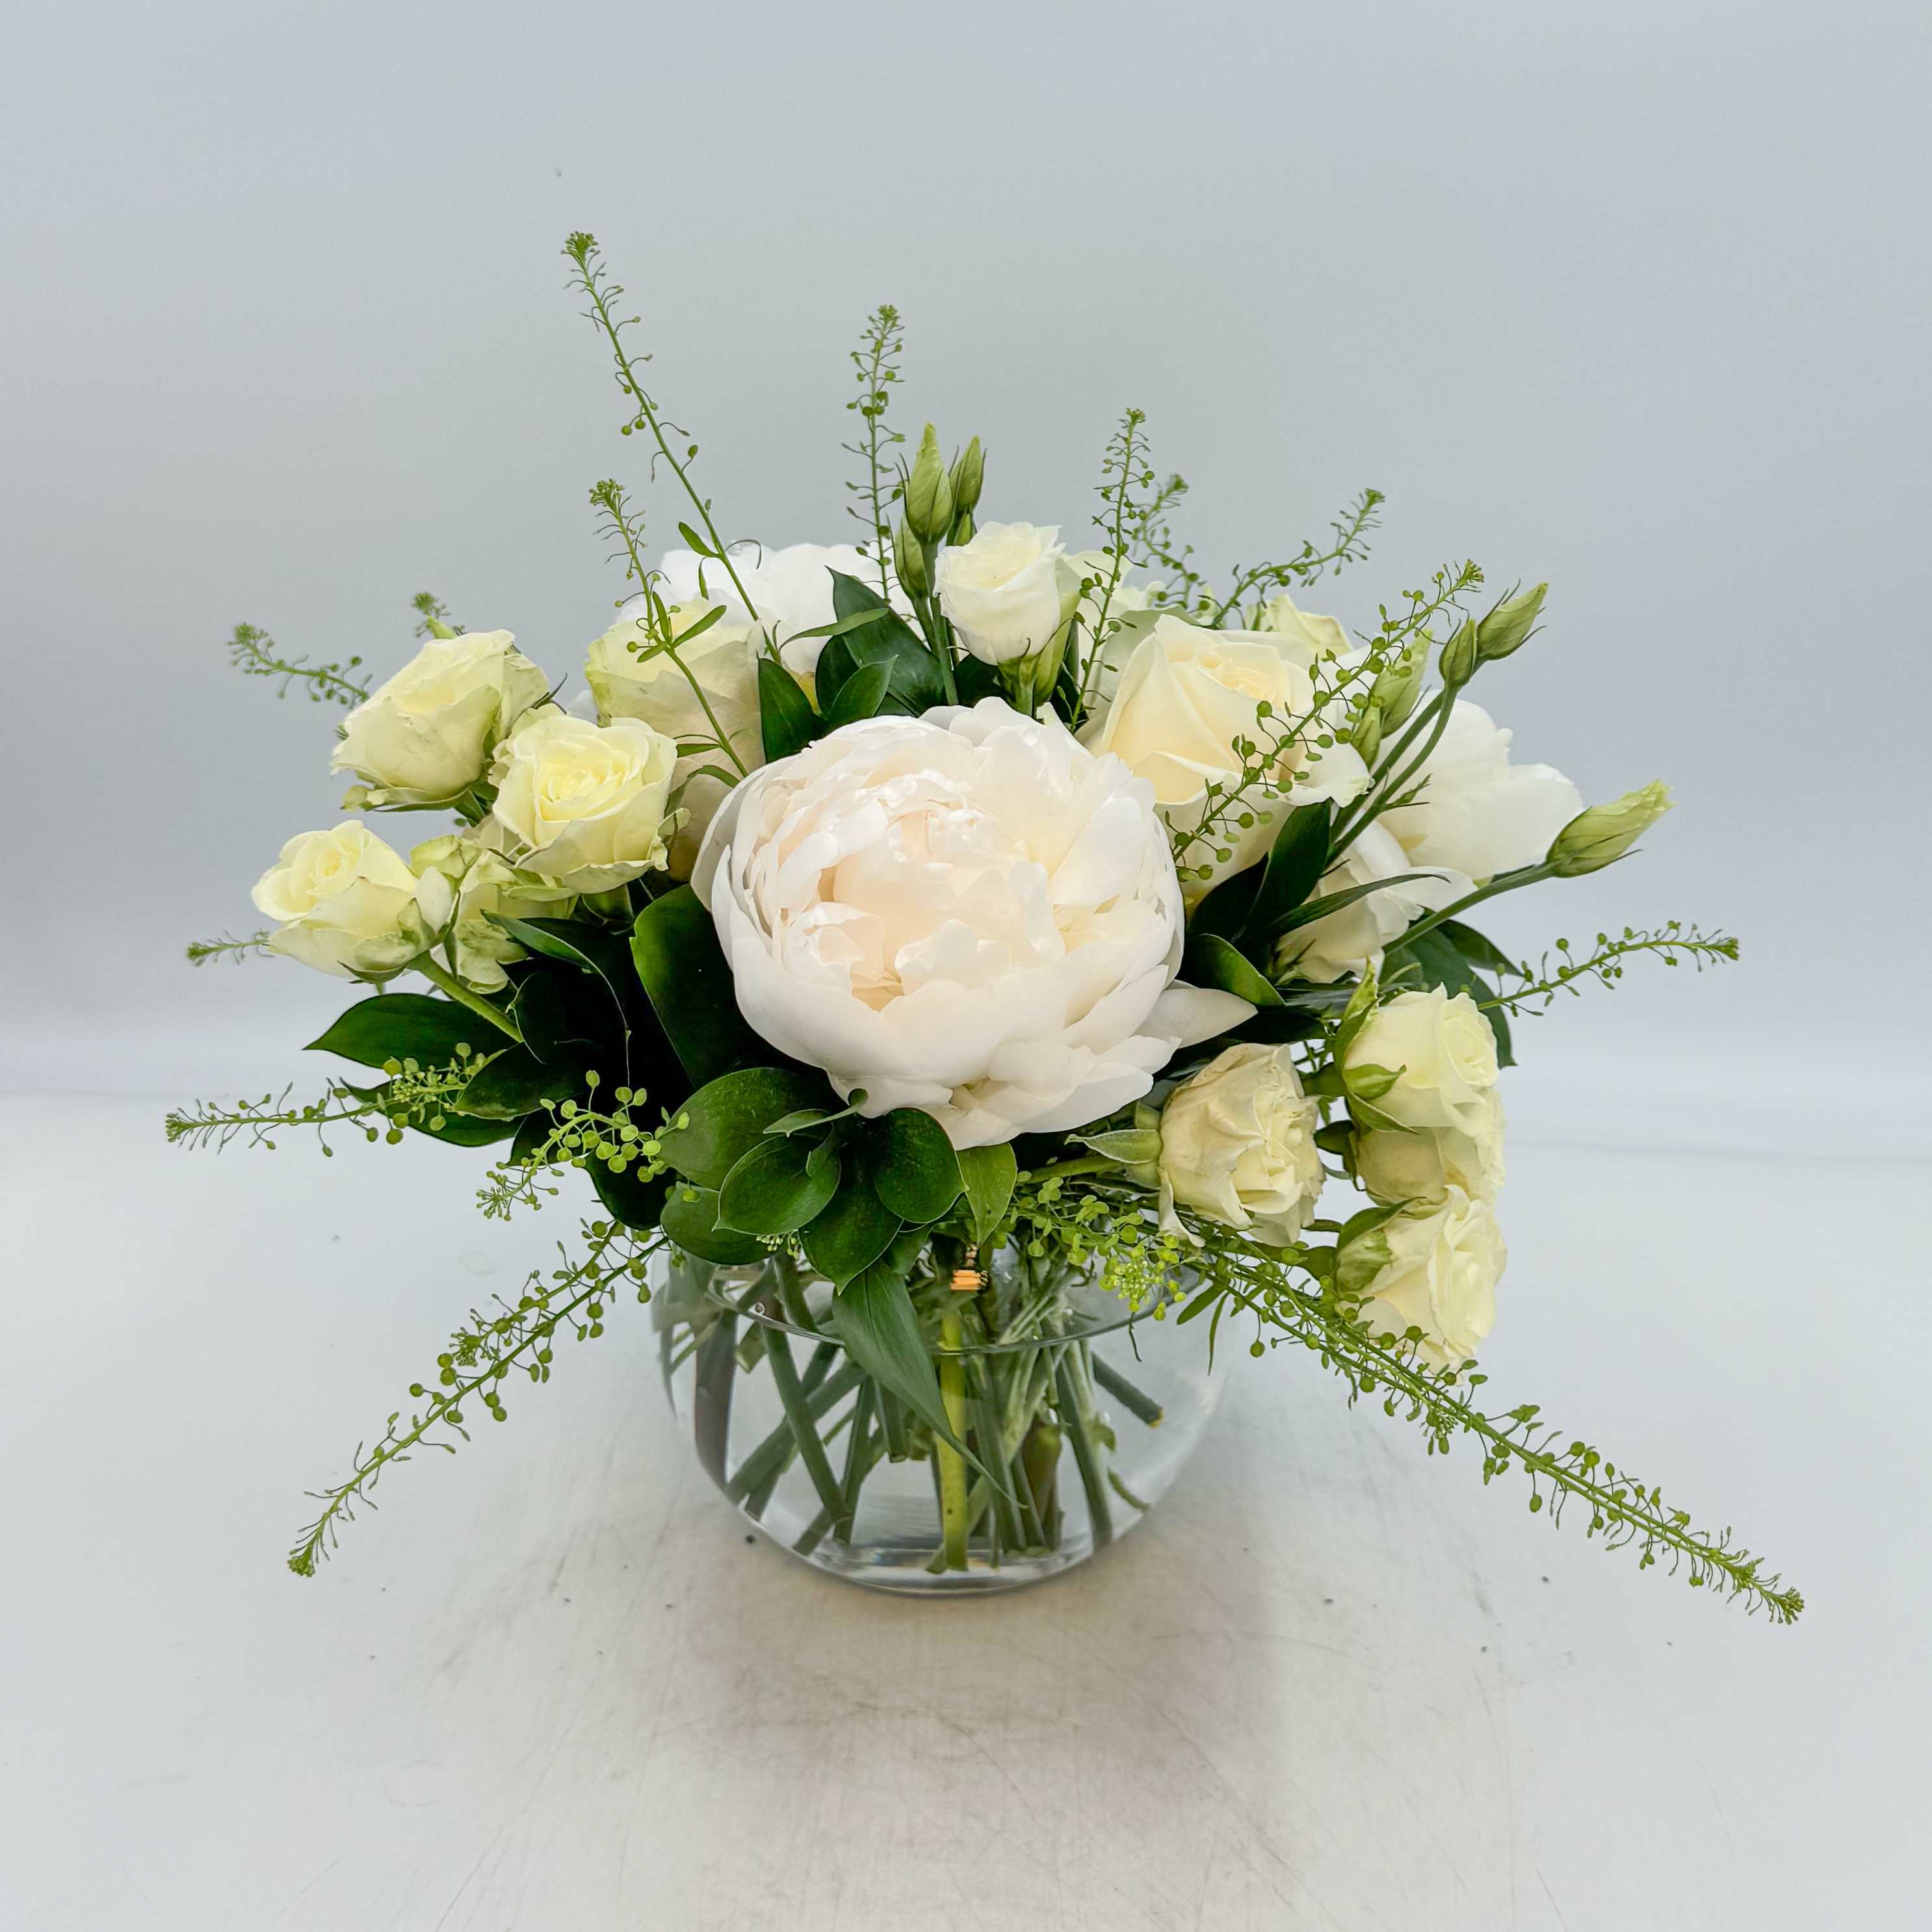 Mumzy - Mumzy features White Peonies, Cream colored Vendela Roses, White Spray Roses and White Lisianthus, Italian Ruscus and Pennygrass. Measurements: The Standard Mumzy is designed in a 6 inch glass bubble bowl vase; the Deluxe Mumzy is designed in a 8 inch glass bubble bowl vase; and the Premium Mumzy is designed in a 10 inch glass bubble bowl vase.